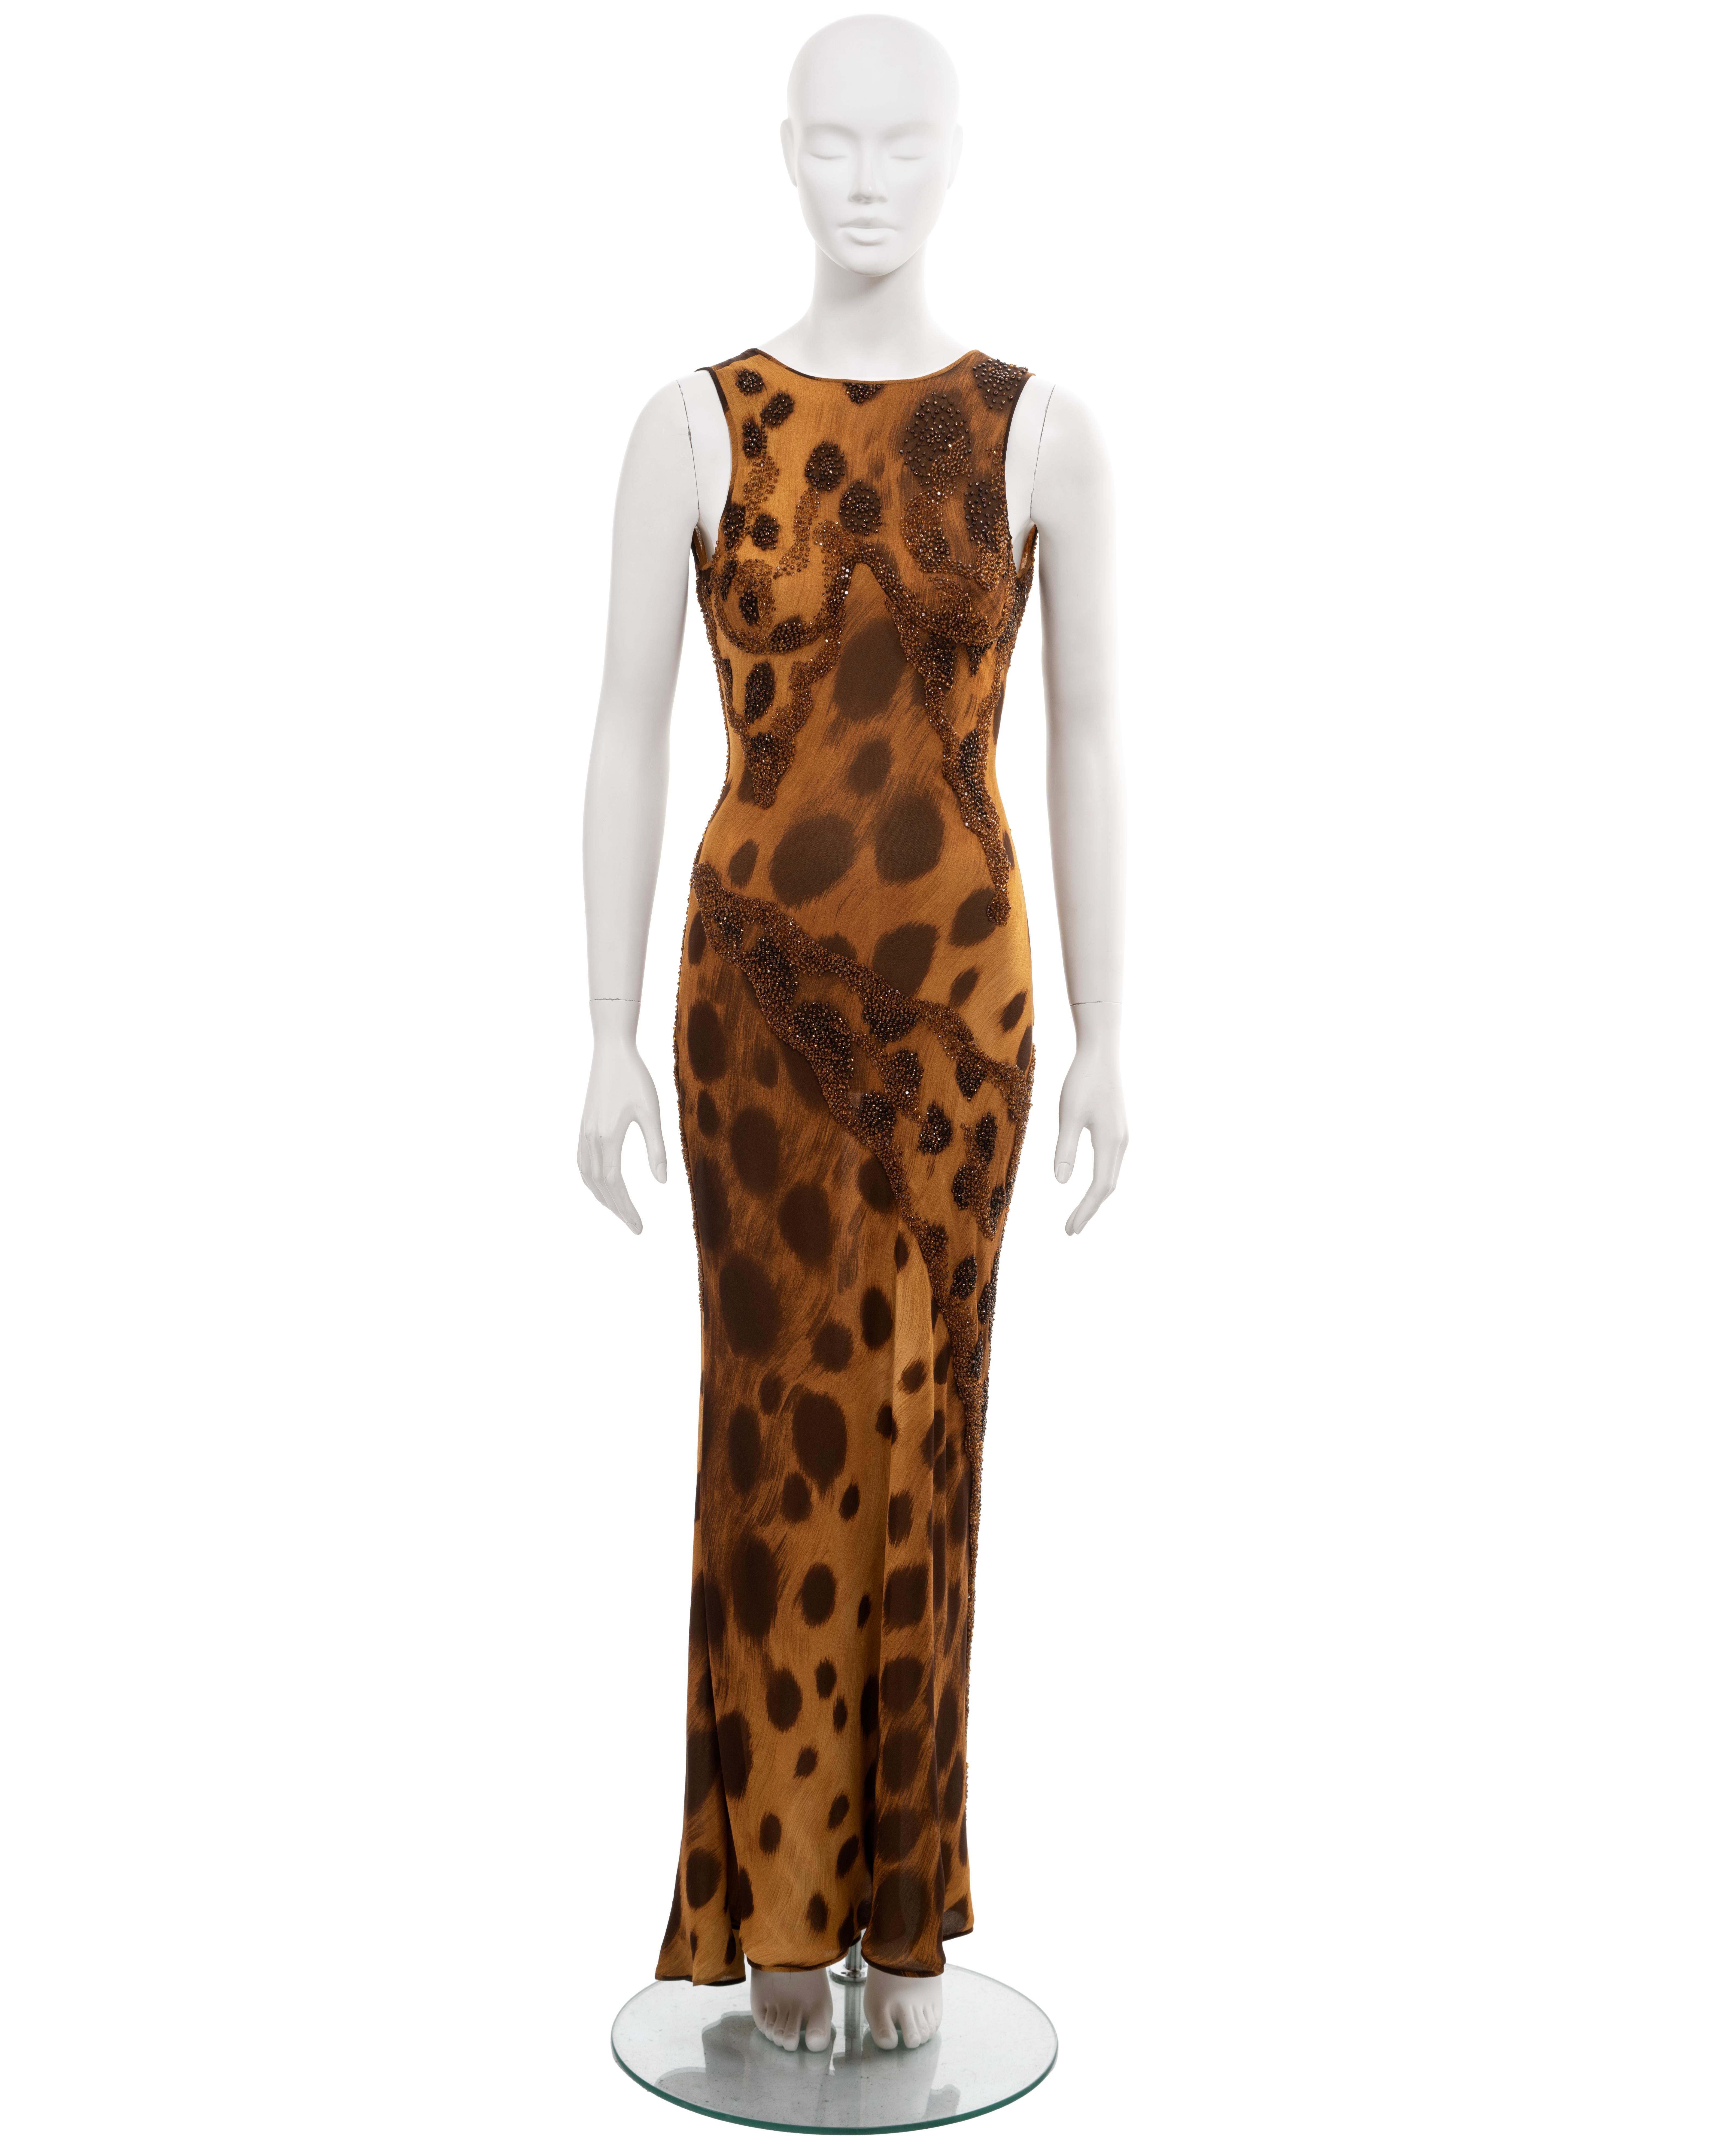 ▪ Archival Atelier Versace evening dress
▪ Haute Couture, Fall-Winter 1996 
▪ Sold by One of a Kind Archive
▪ Museum Grade
▪ Constructed from a cheetah-printed silk, featuring warm tones of tan, brown, and black
▪ Thousands of hand-sewn faceted